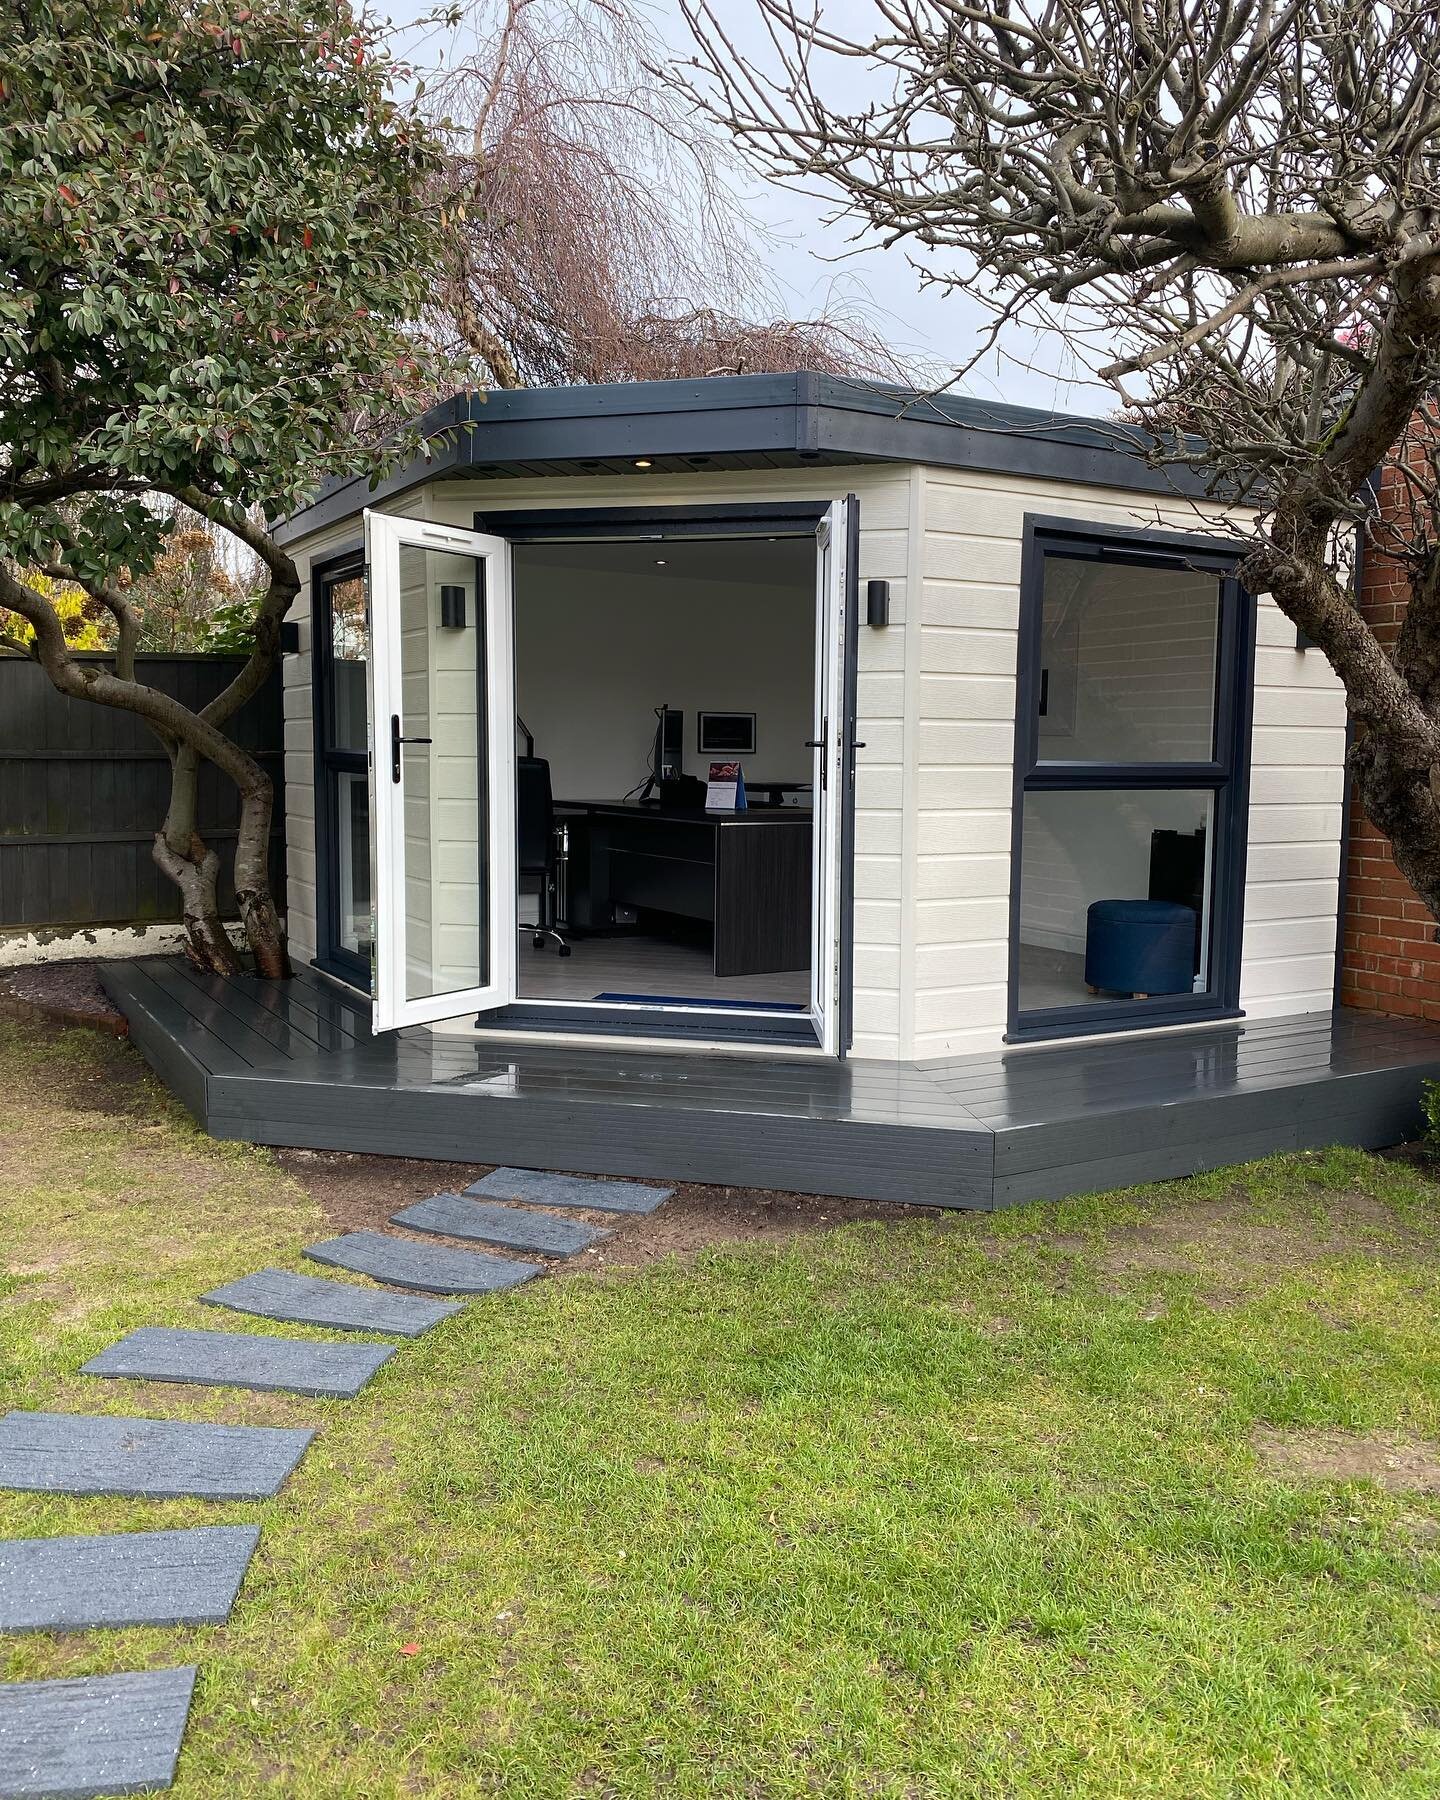 👀Take a look around this corner garden office, designed in a pentagon shape to make the most of the space, without losing the established trees 🌳🤍

Our expert joiners even incorporated one of the trees into the composite decking! 🪚

Other special